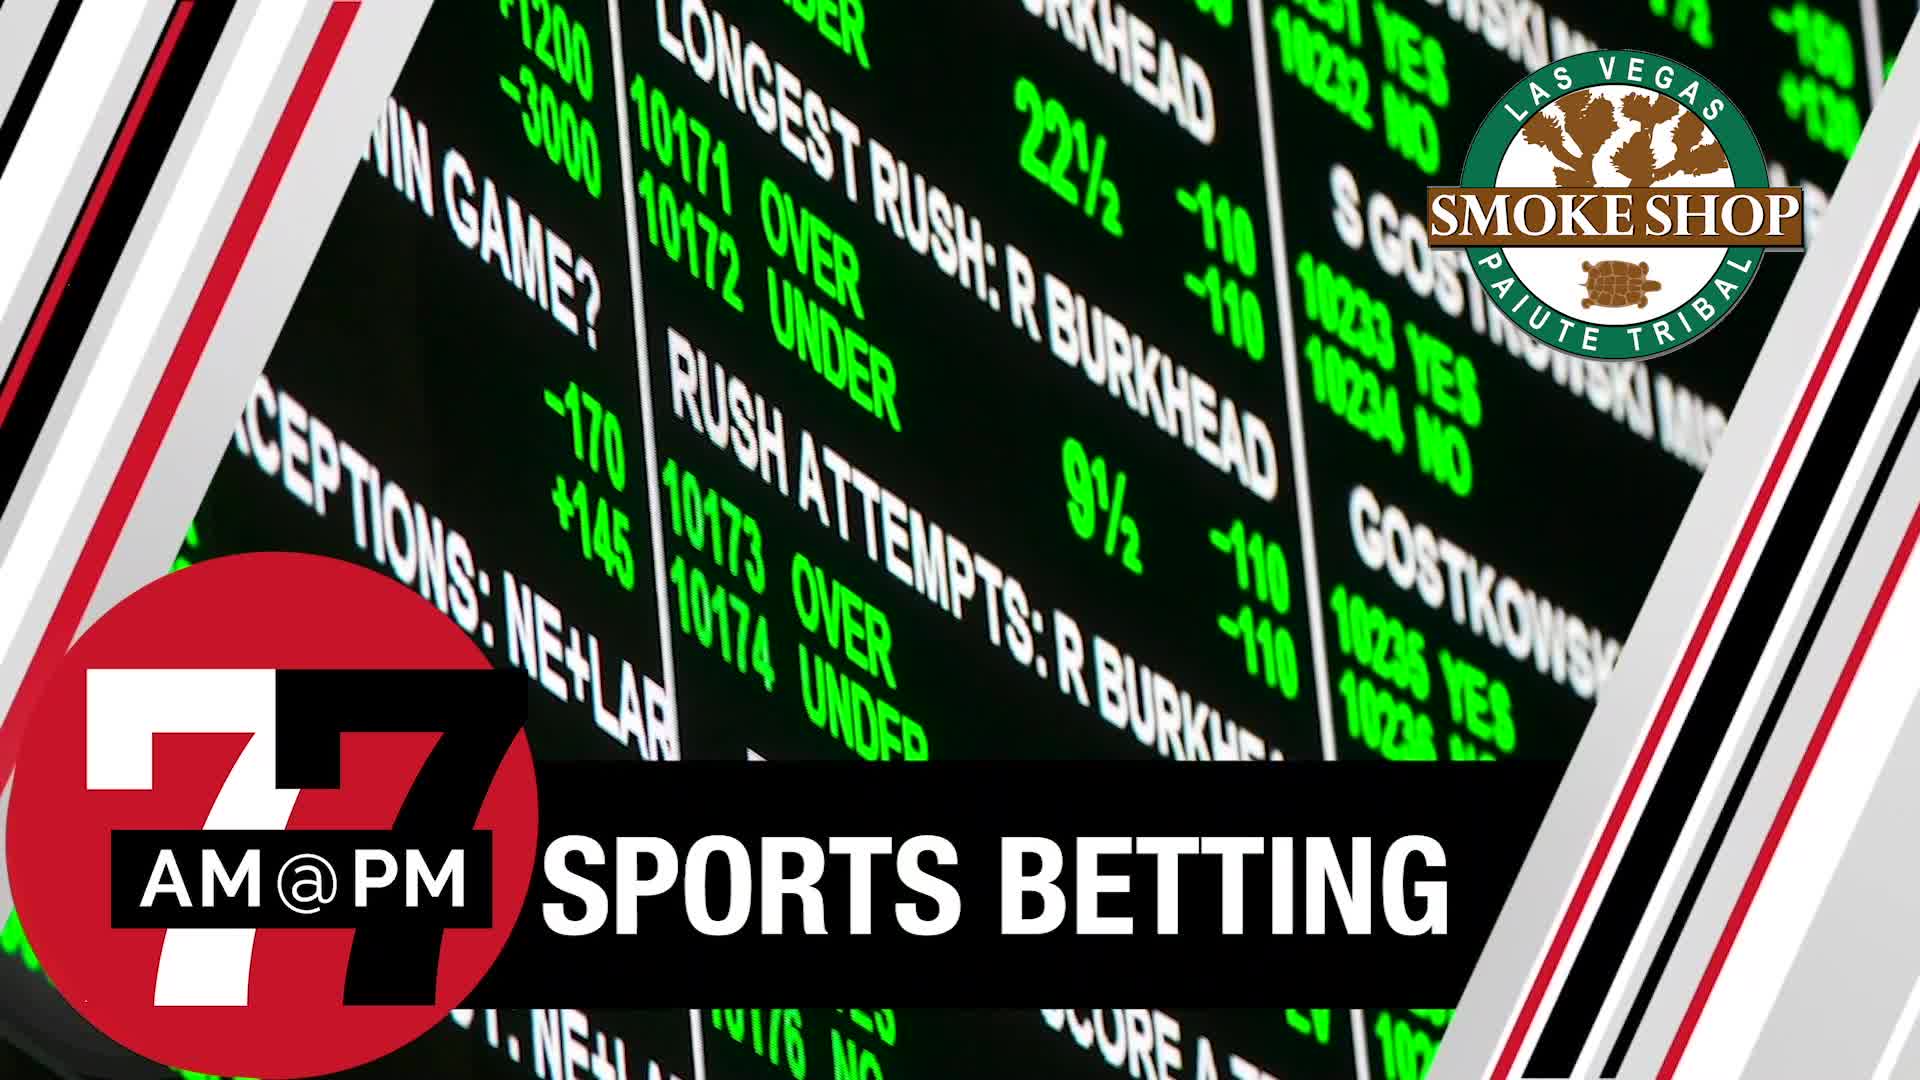 Bettor has $400 to win $800K riding on FAU